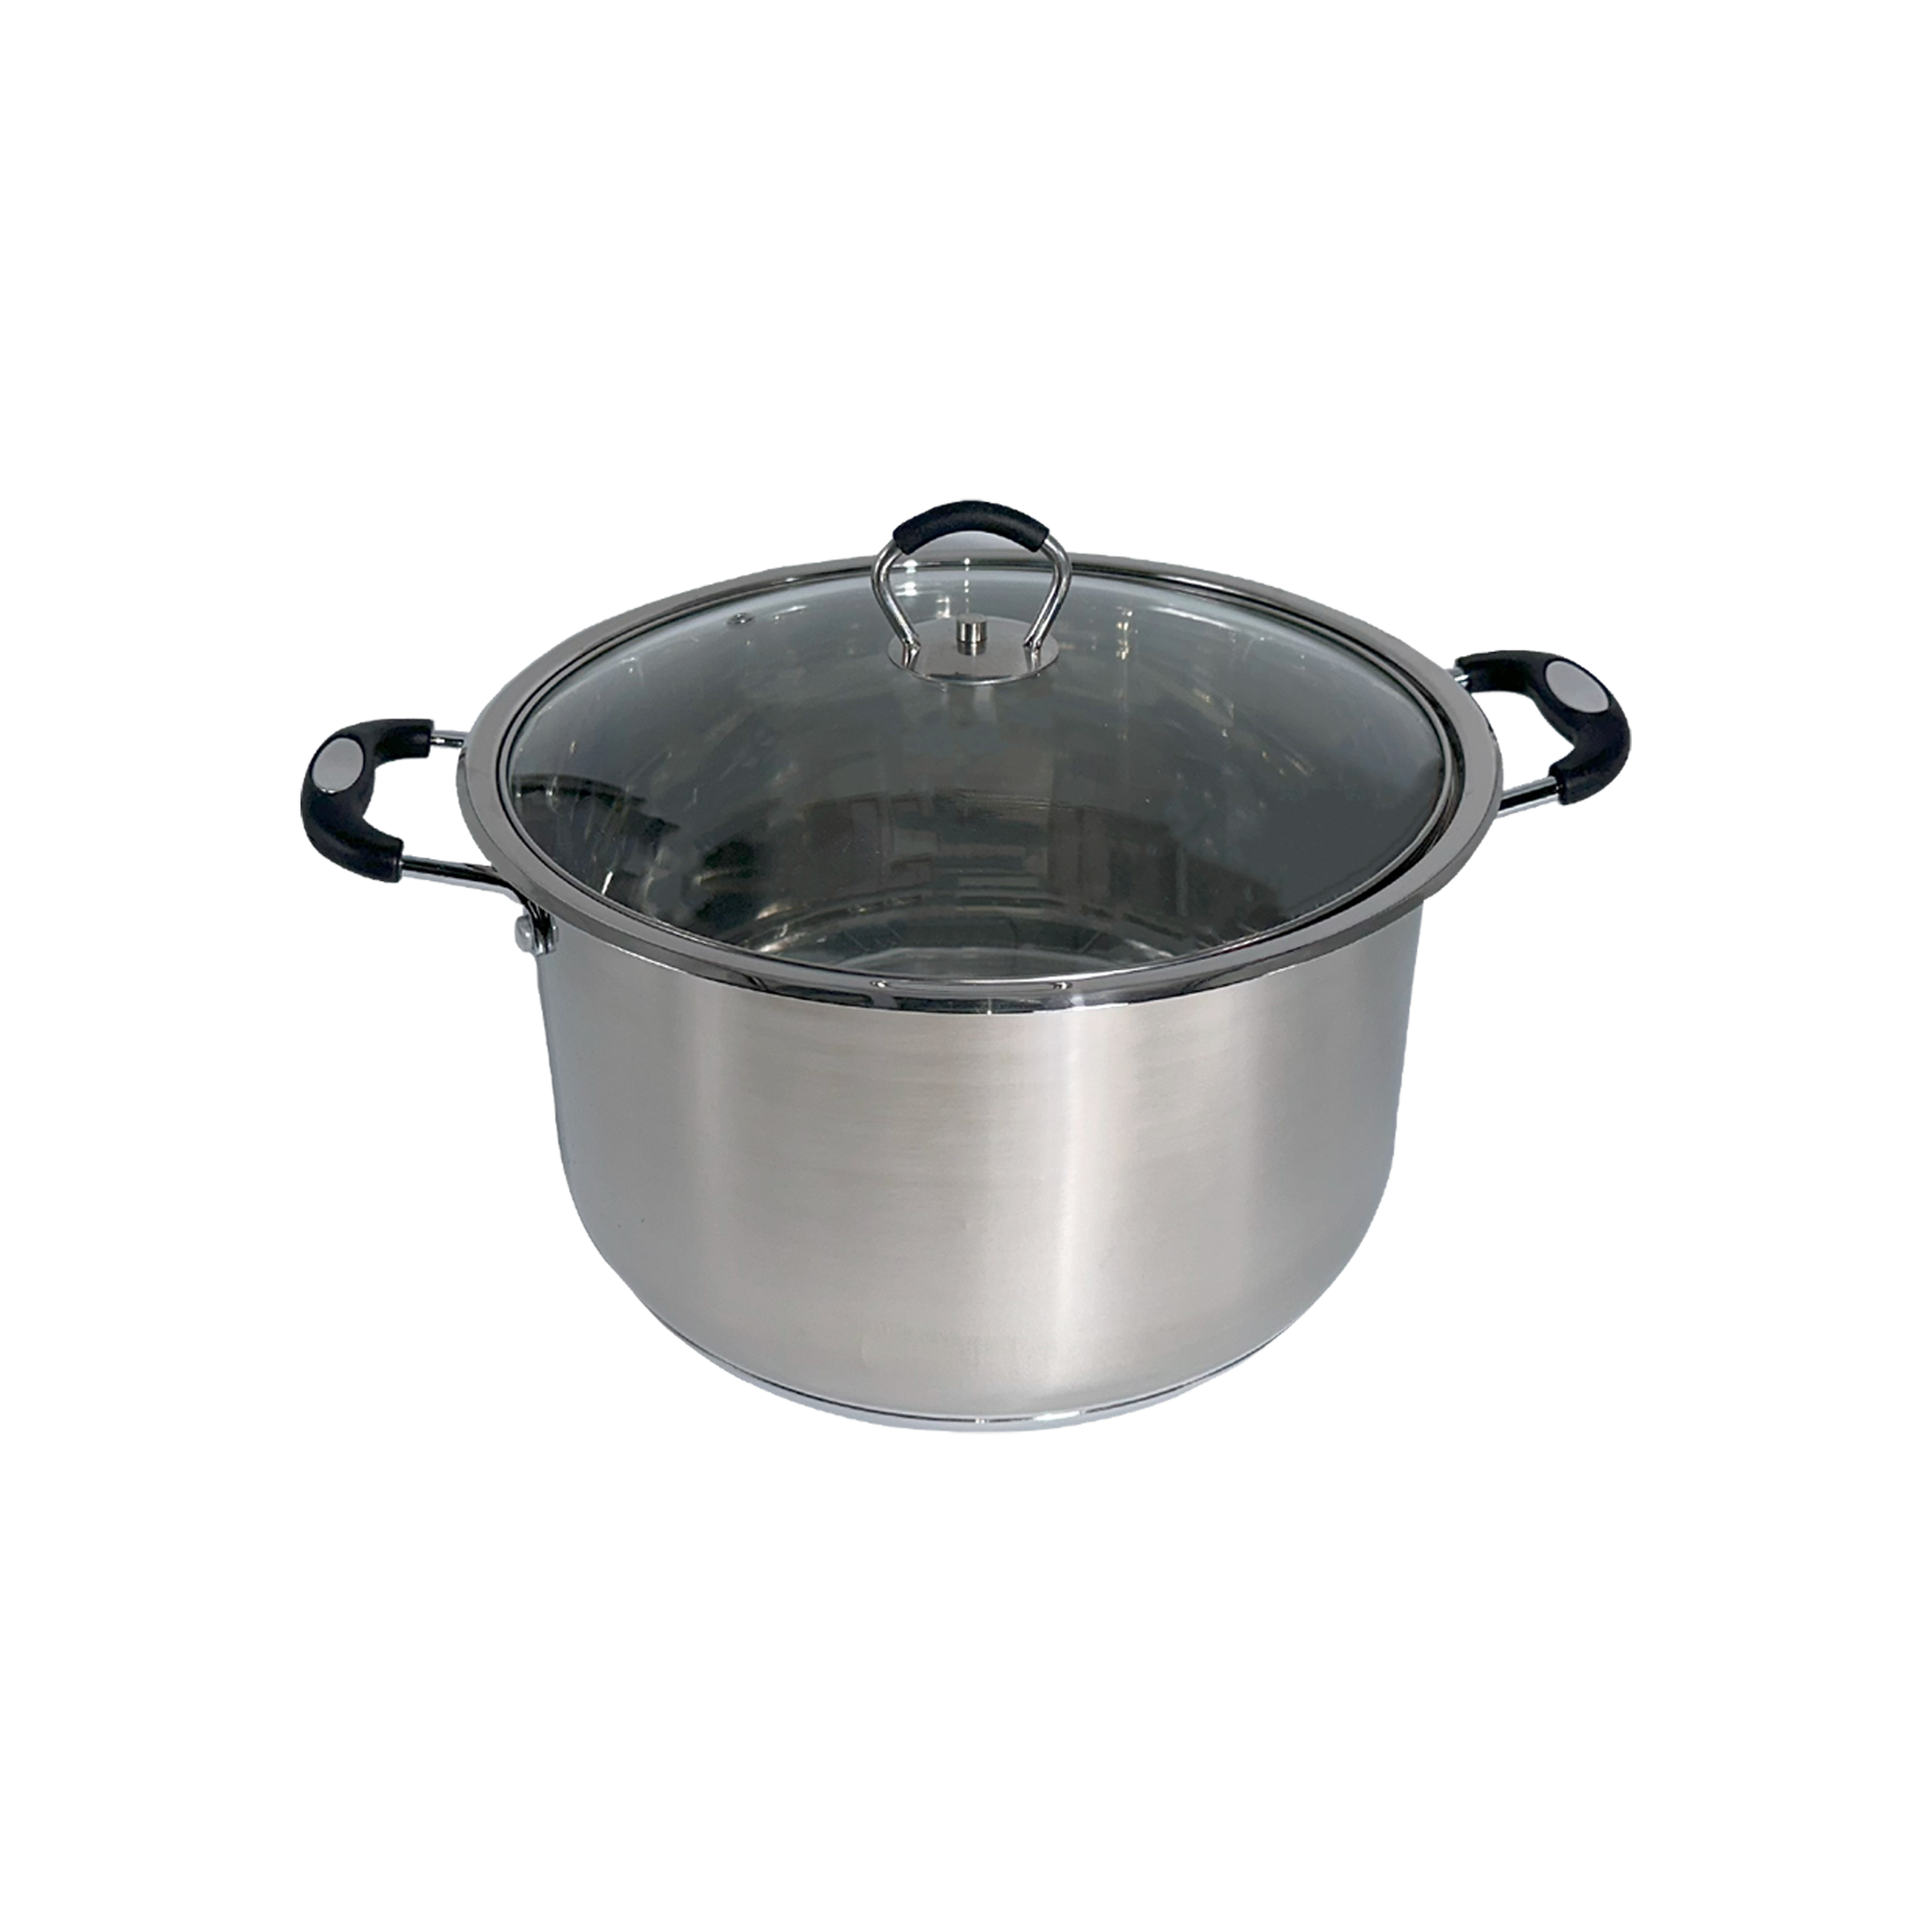 Glaxa Stainless Steel Induction Base Casserole/Pots With Lid - 28cm